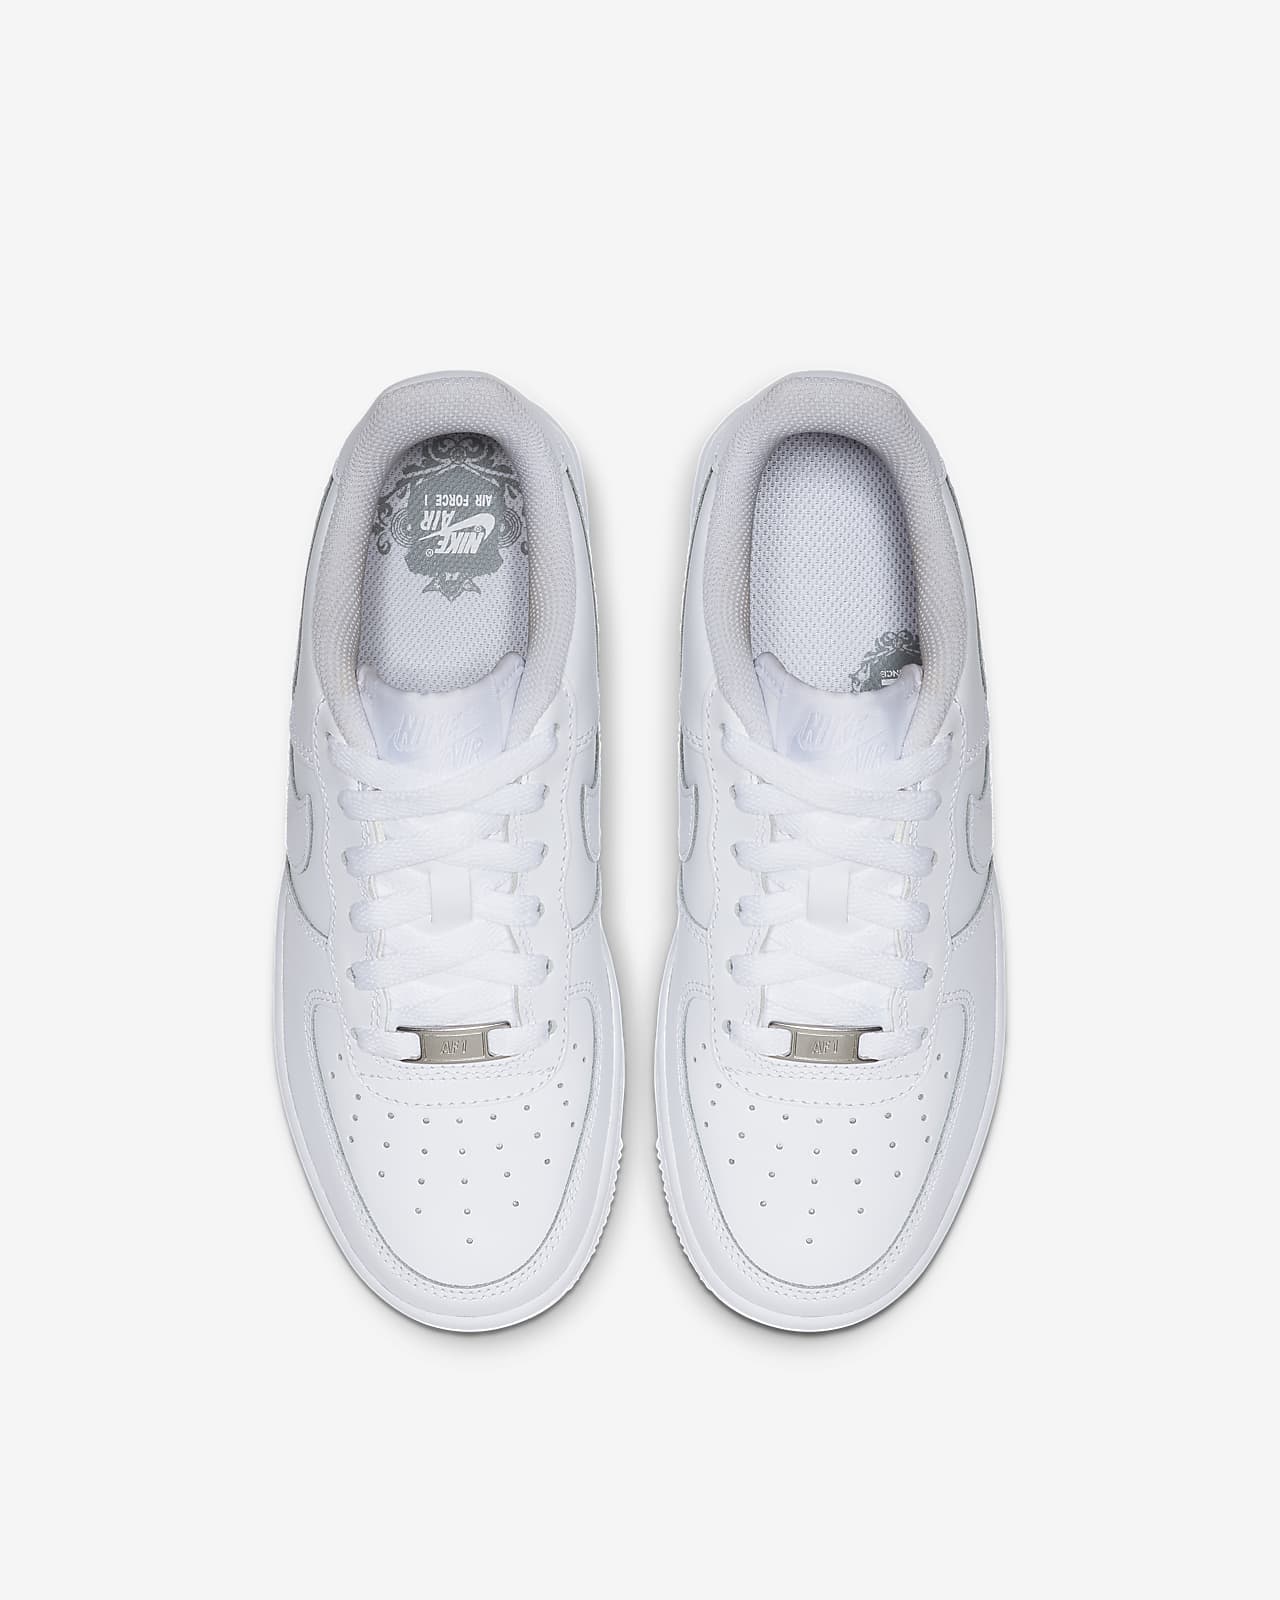 nike air force 1 youth white